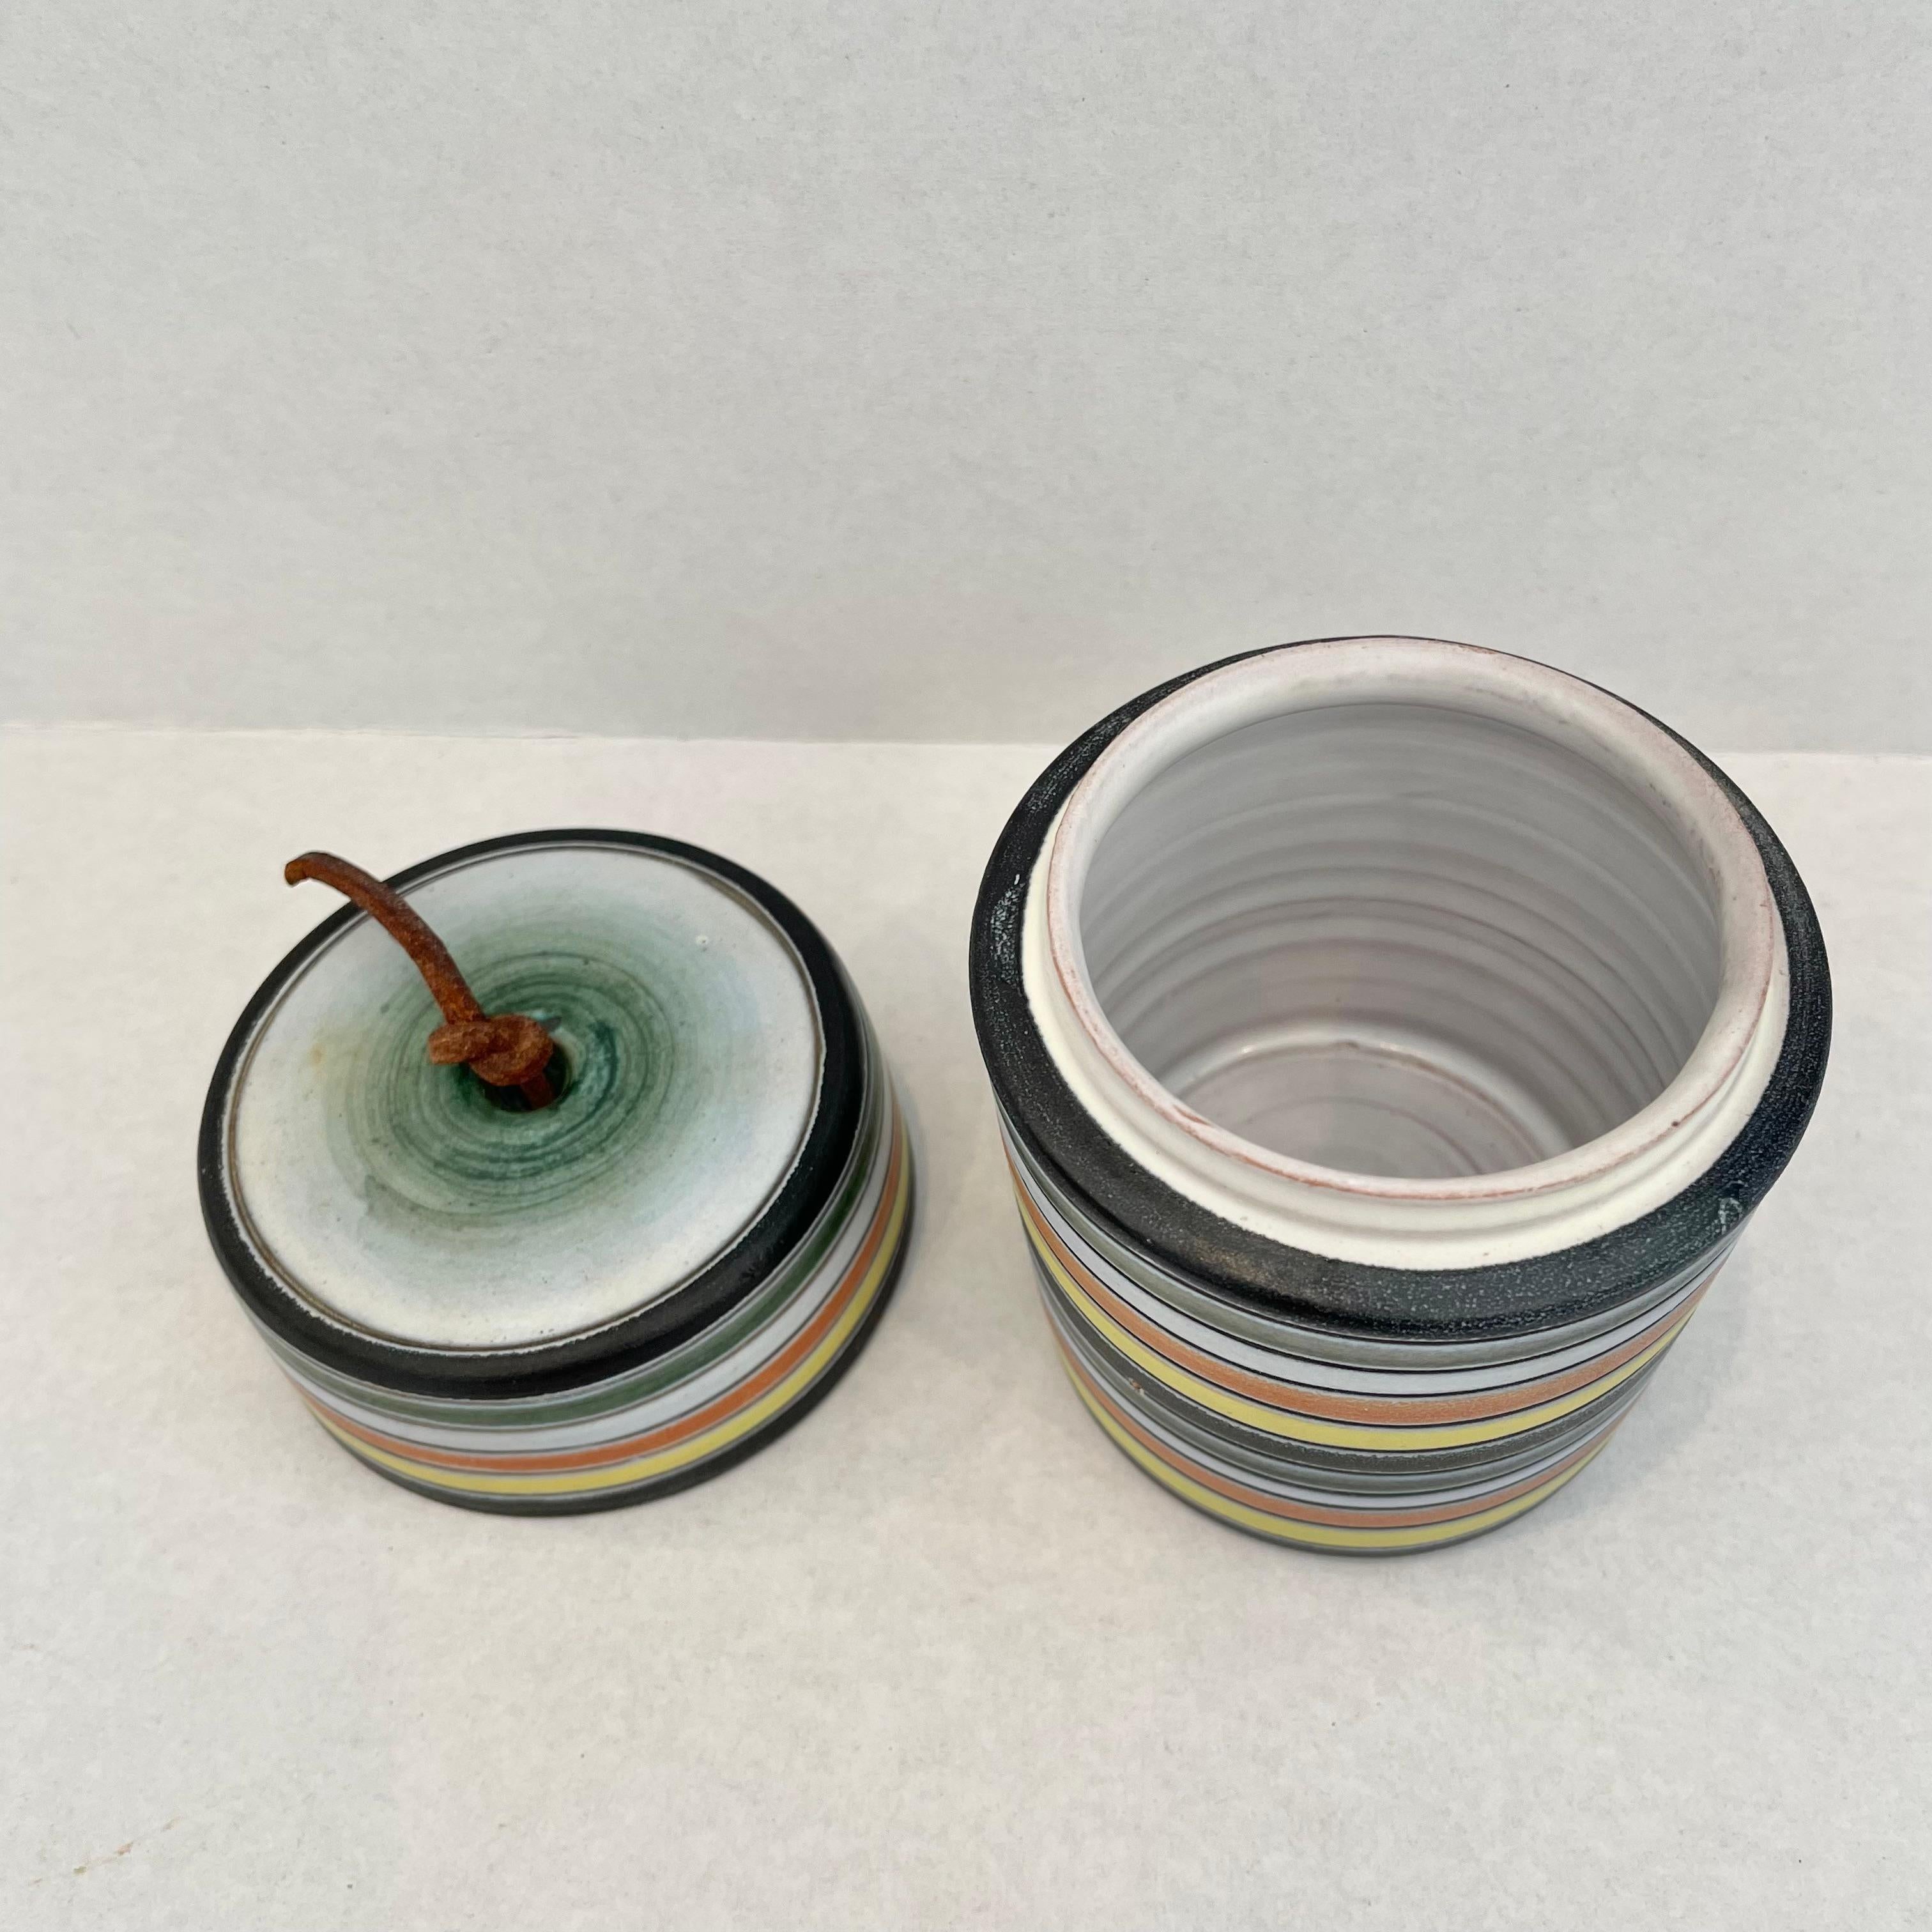 Ceramic Stash Jar by Raymor In Good Condition For Sale In Los Angeles, CA